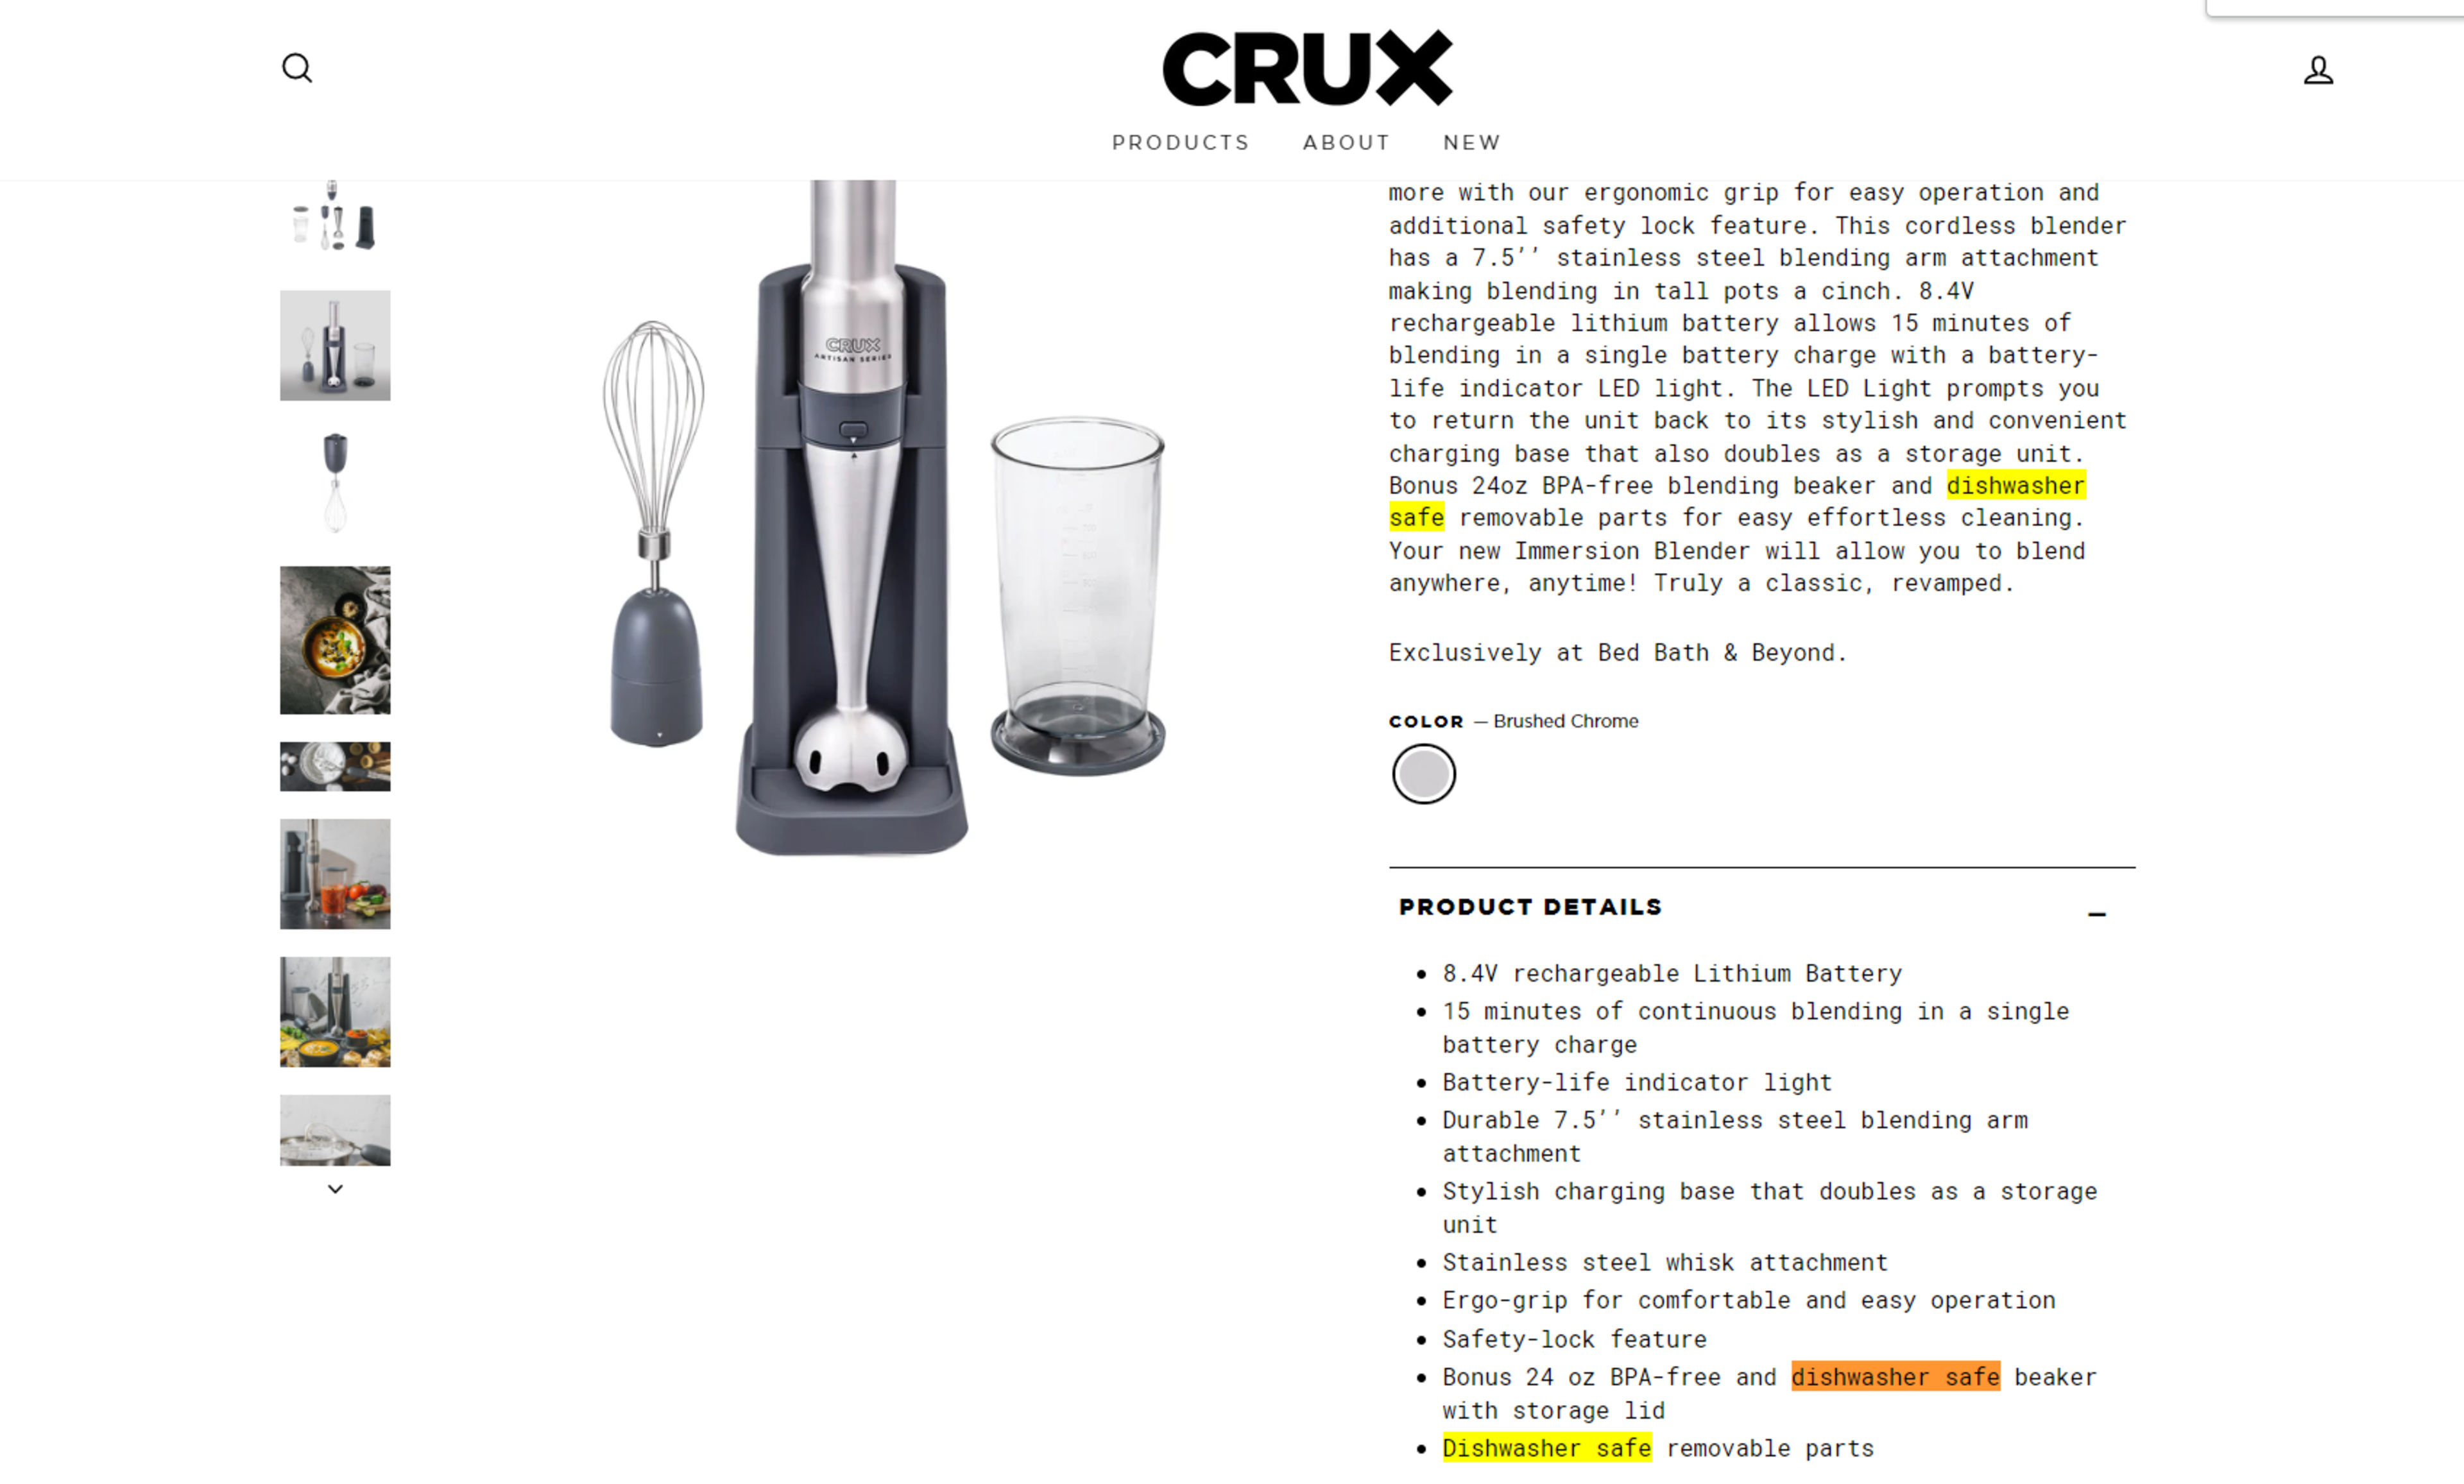  Crux Cordless Hand Immersion Blender, 7.5 inch Blending Arm,  Mix, Whip, Puree Sauces/Soups, Rechargeable, Easy to Clean, Dishwasher Safe  Removeable Parts, Stainless Steel/Black, 14790: Home & Kitchen